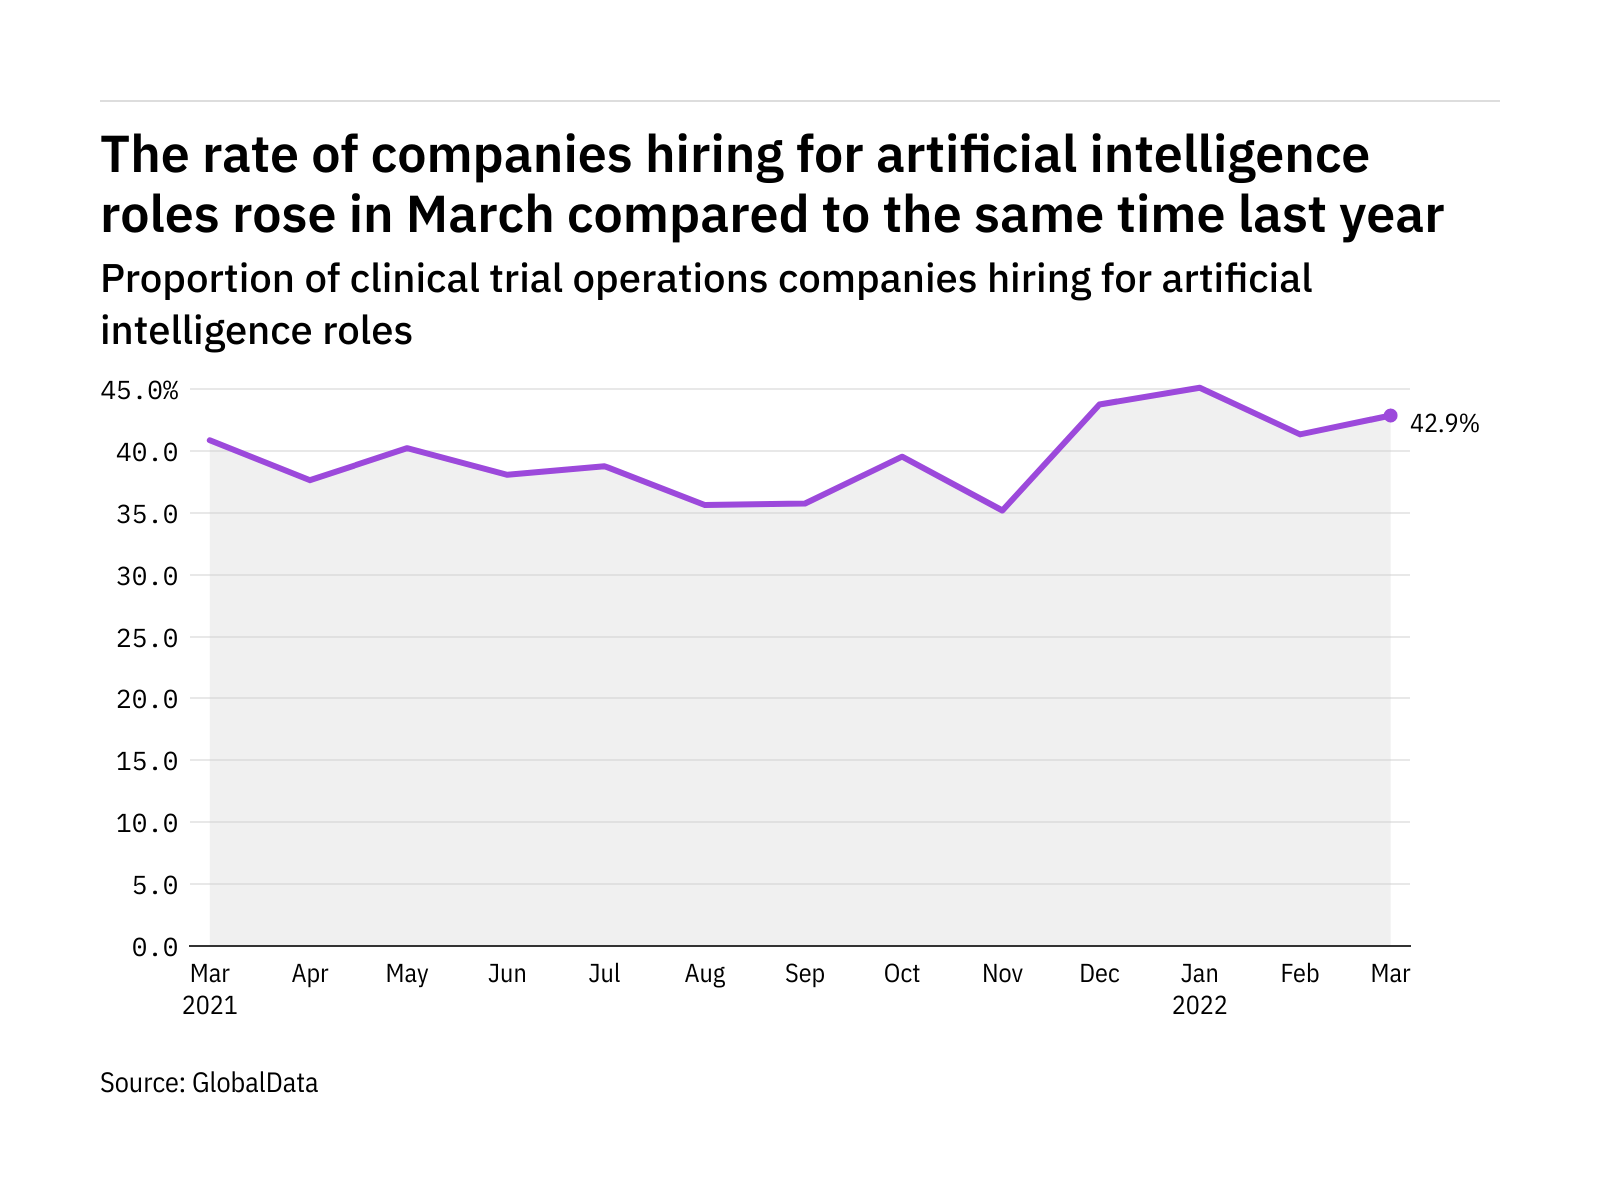 Artificial intelligence hiring levels in the clinical trial operations industry rose in March 2022